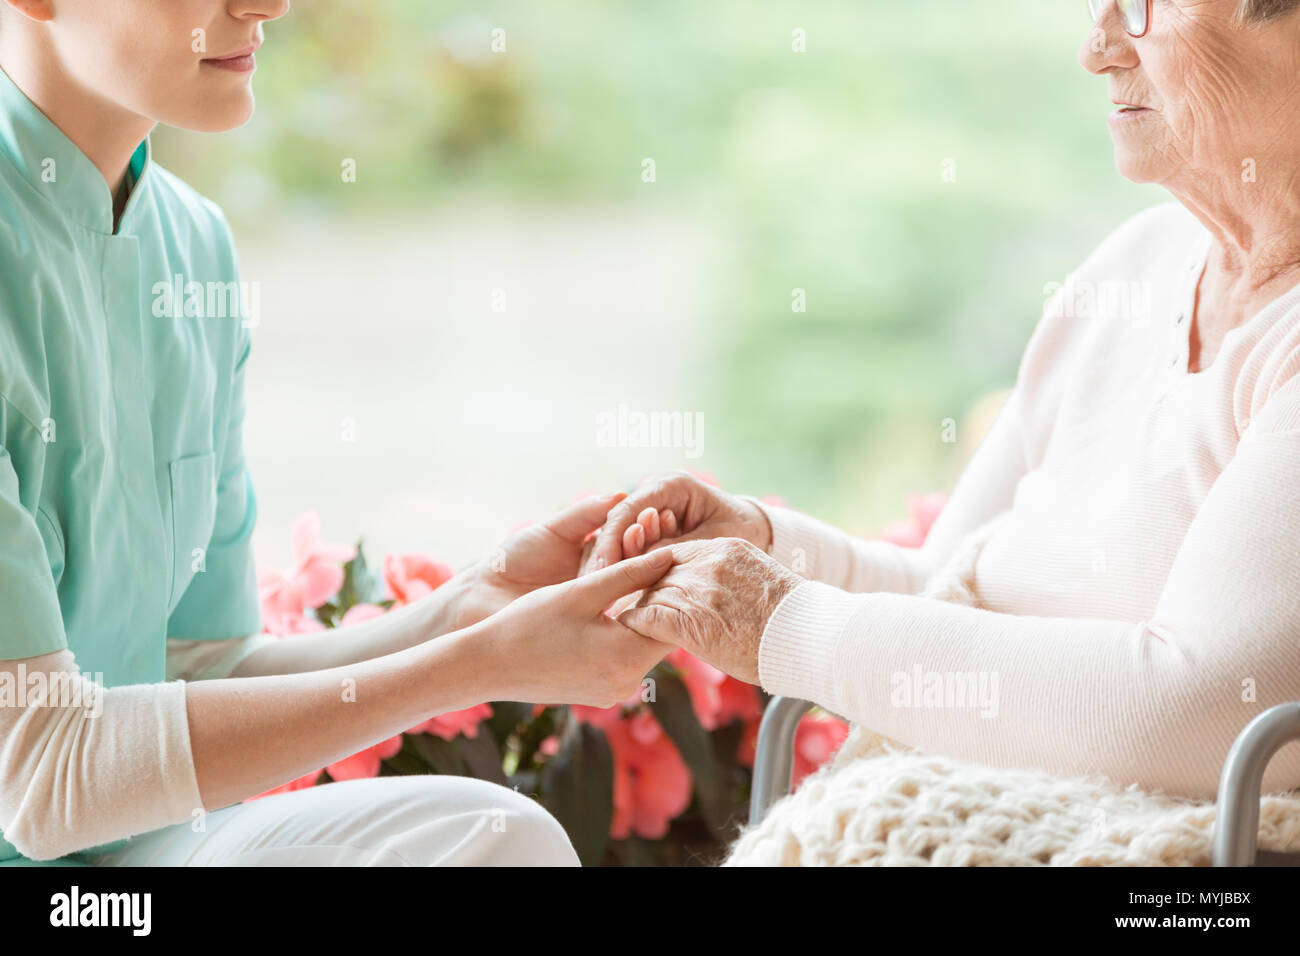 Nurse holding hands of disabled elderly woman in a wheelchair Stock Photo